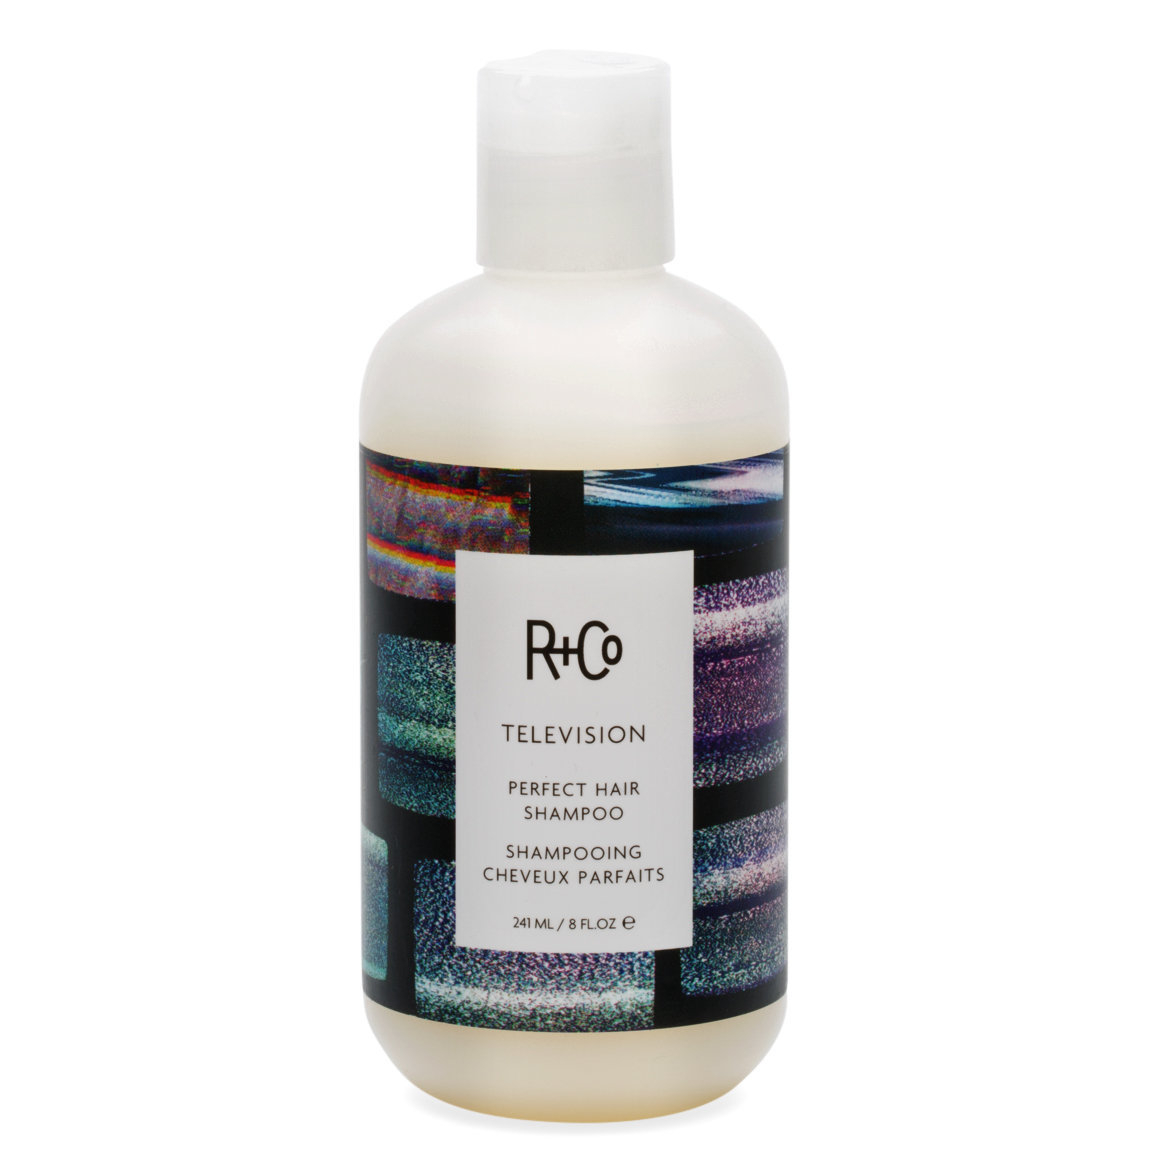 R+Co Television Perfect Hair Shampoo 8.5 fl oz alternative view 1 - product swatch.